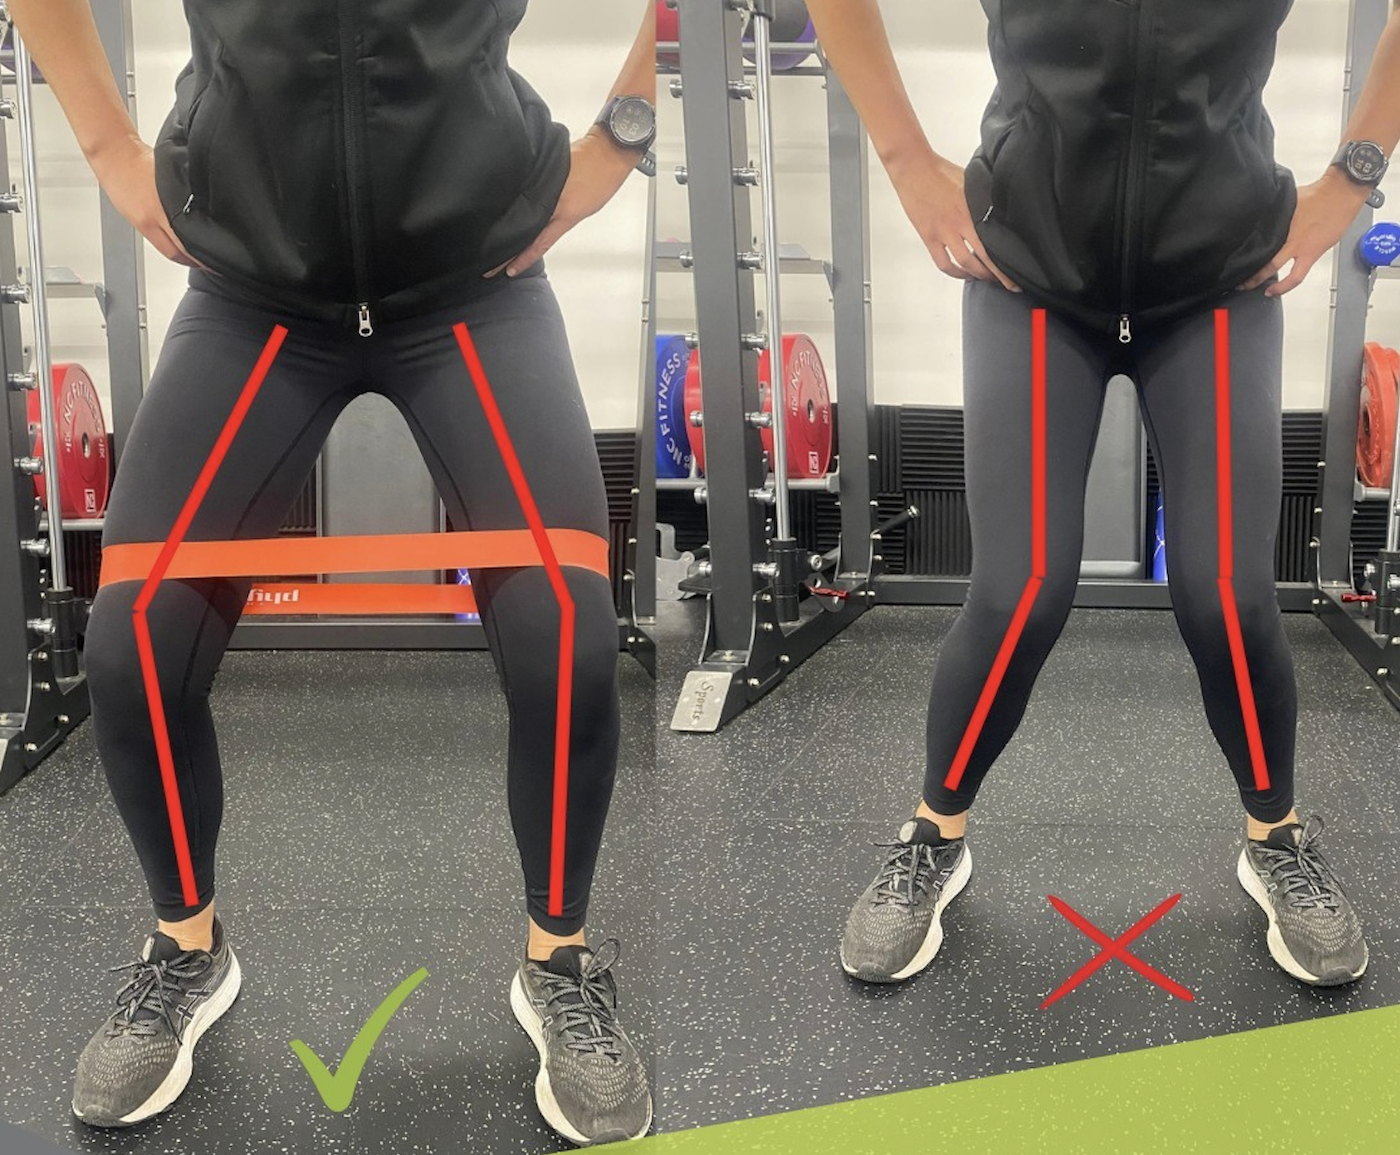 Knee collapse, also known as valgus collapse, when squatting is very common. ⁠ ⁠A valgus collapse in a squat may not be due to any issues with the knee.